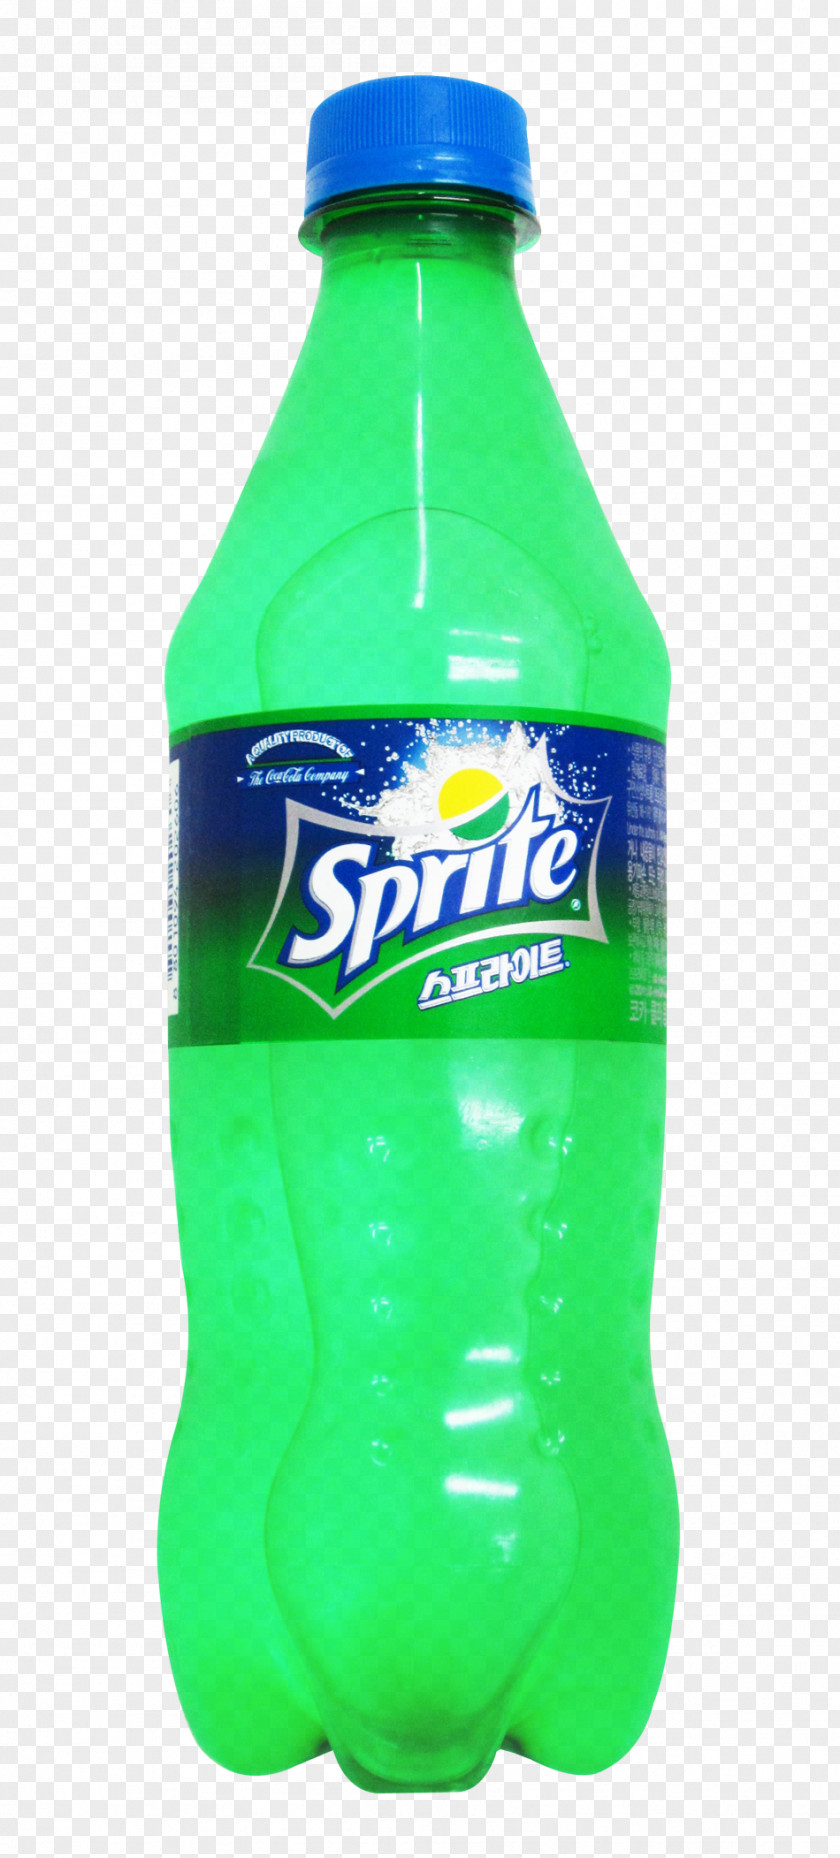 Sprite Bottle Soft Drink Coca-Cola Limca Coffee PNG